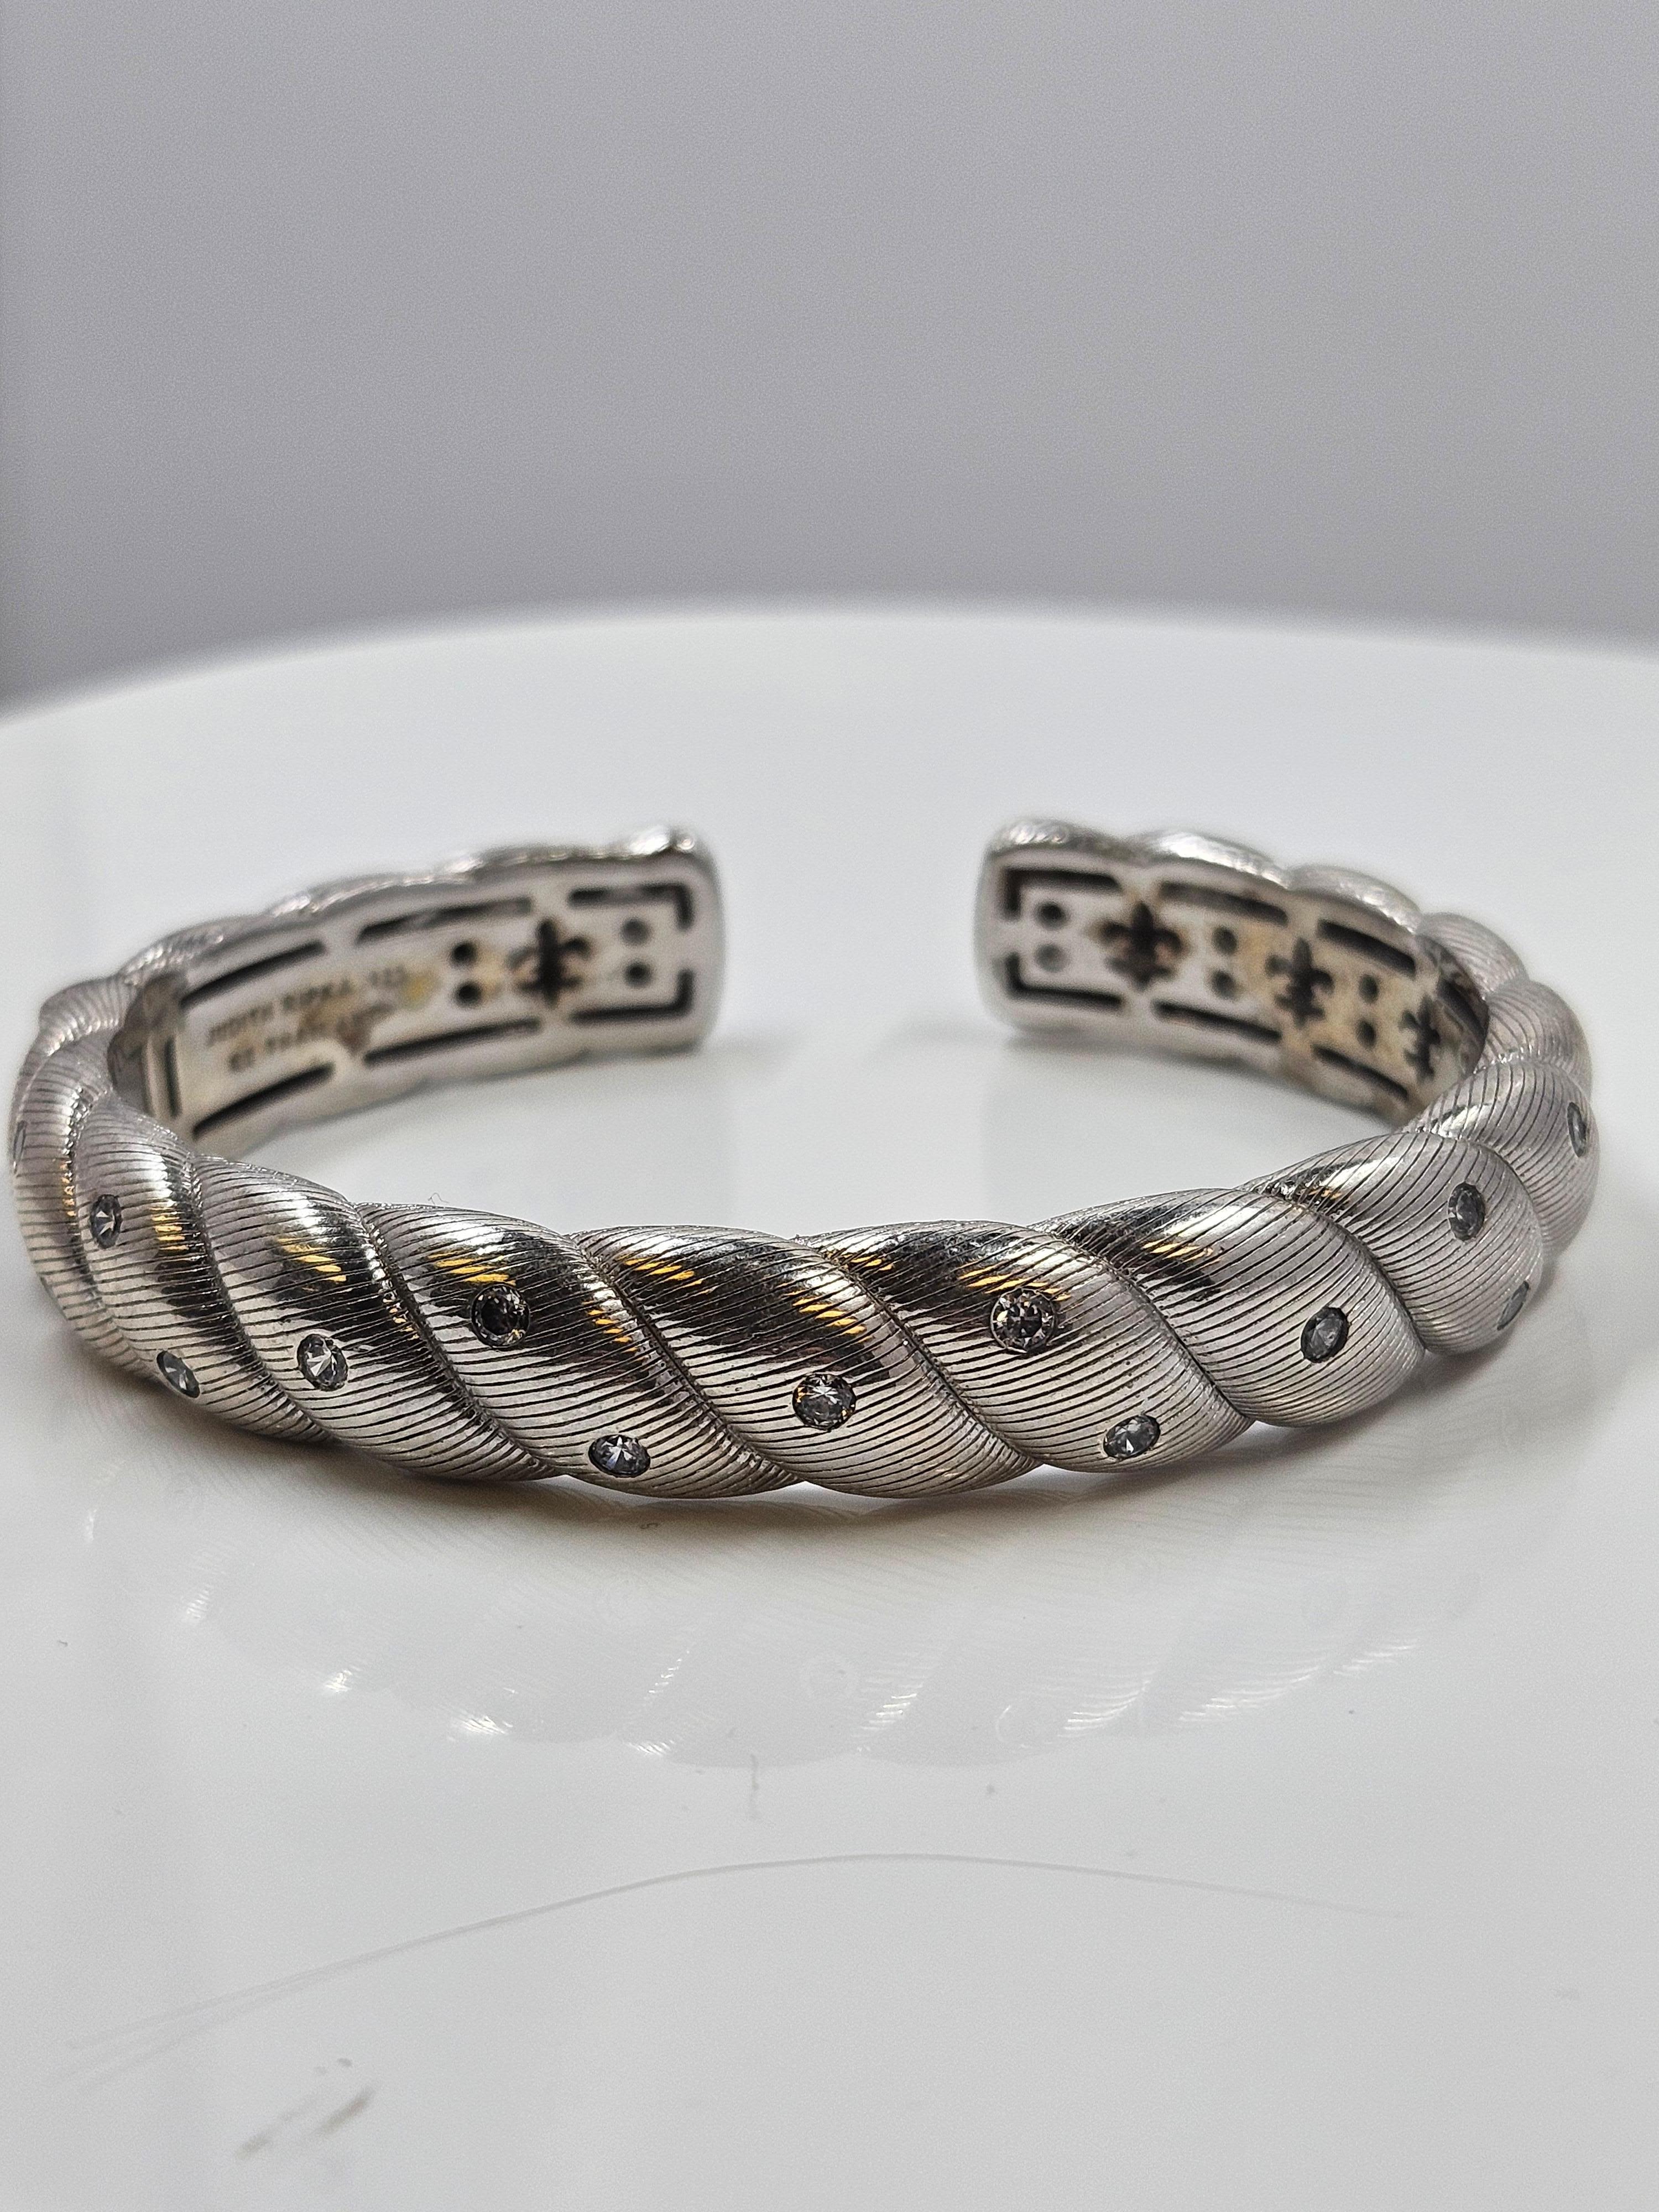 Judith Ripka 925 sterling silver and cz hinged cuff bracelet. 64mm diameter and 12mm band thickness.